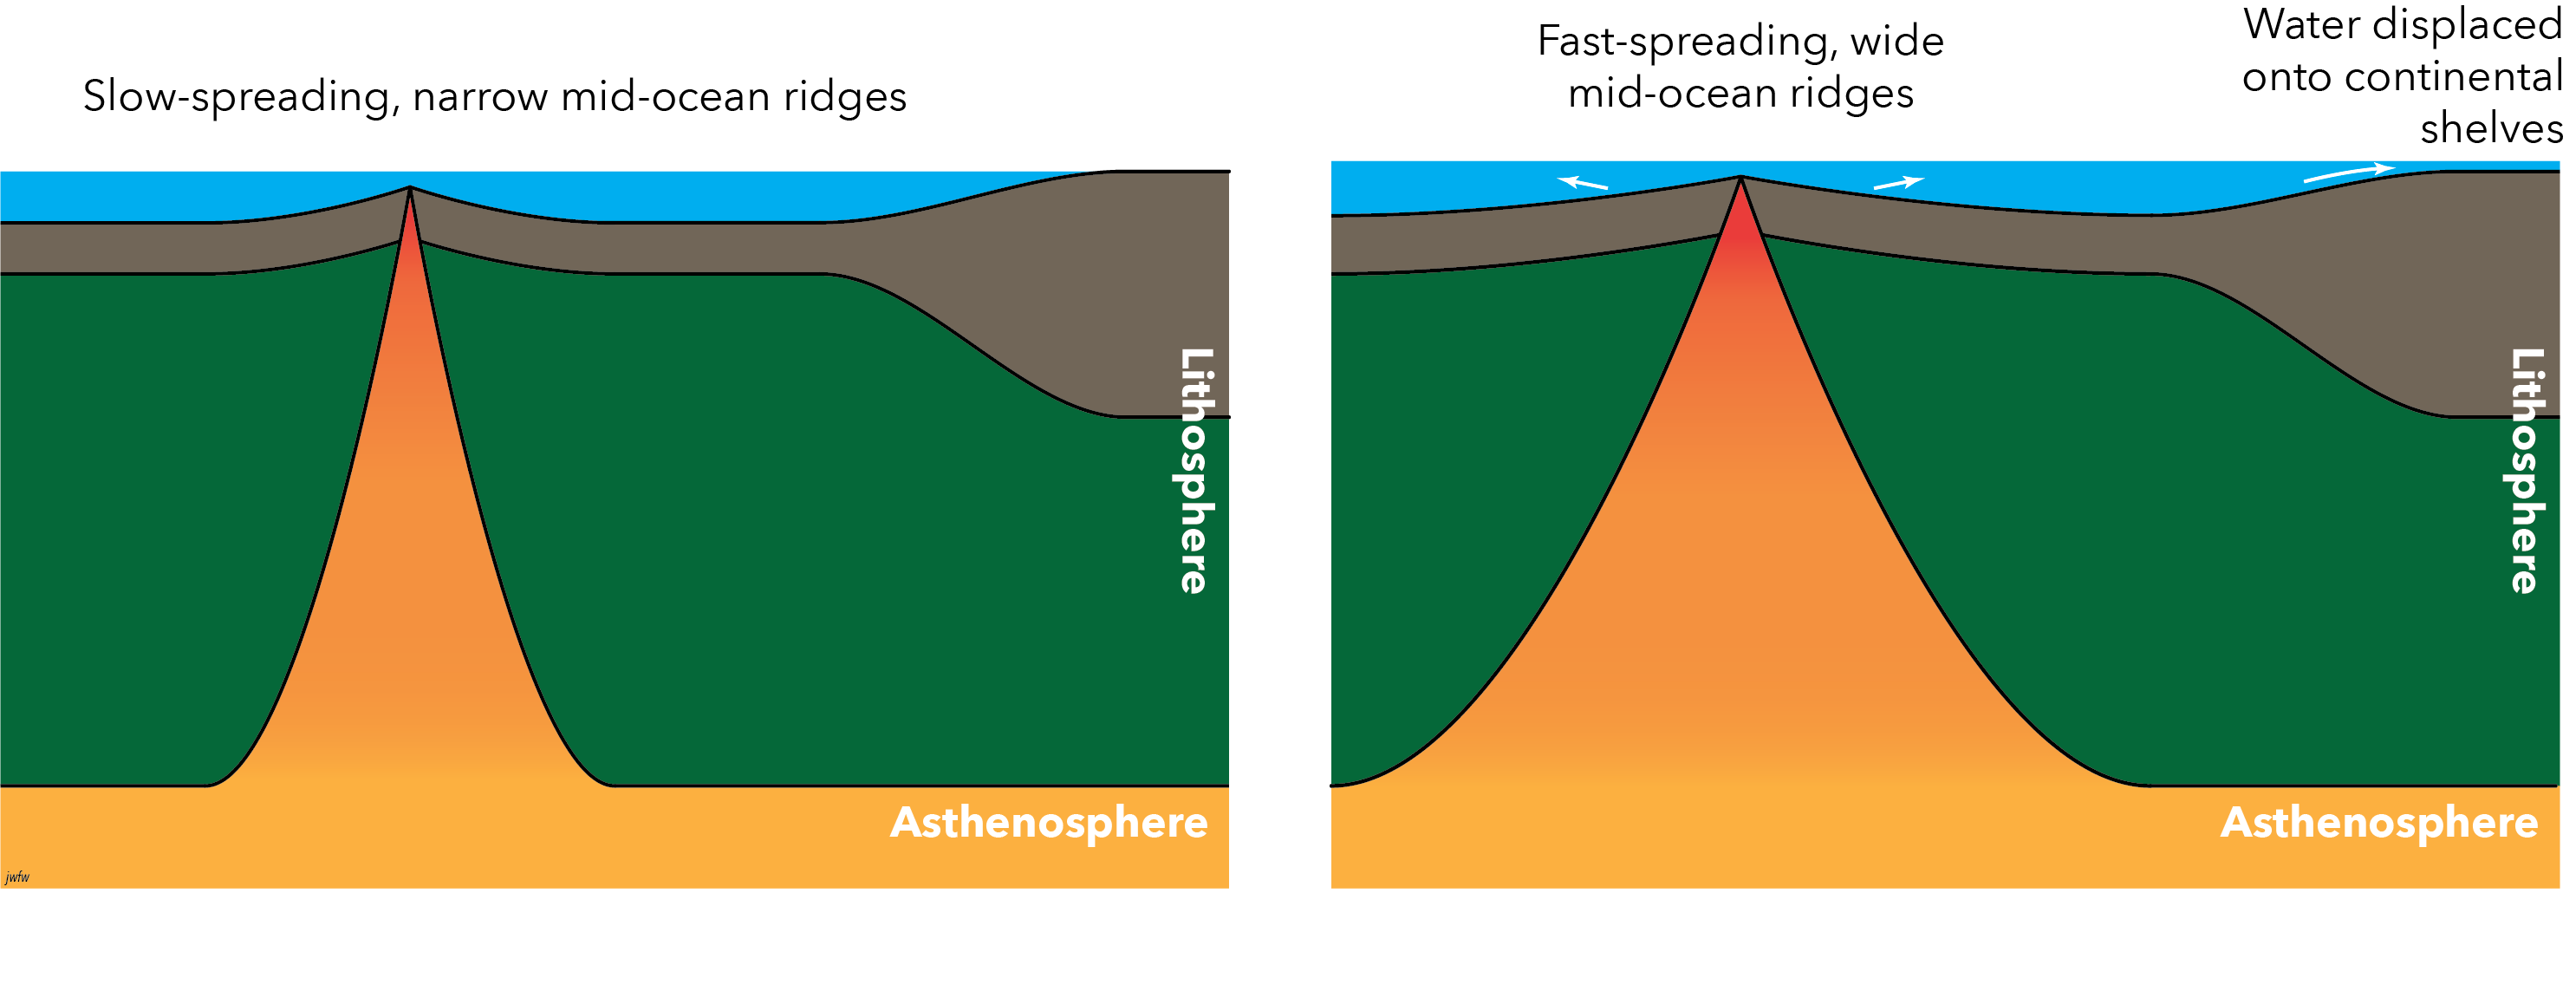 Cross-sections of slow- and fast-spreading mid-ocean ridges